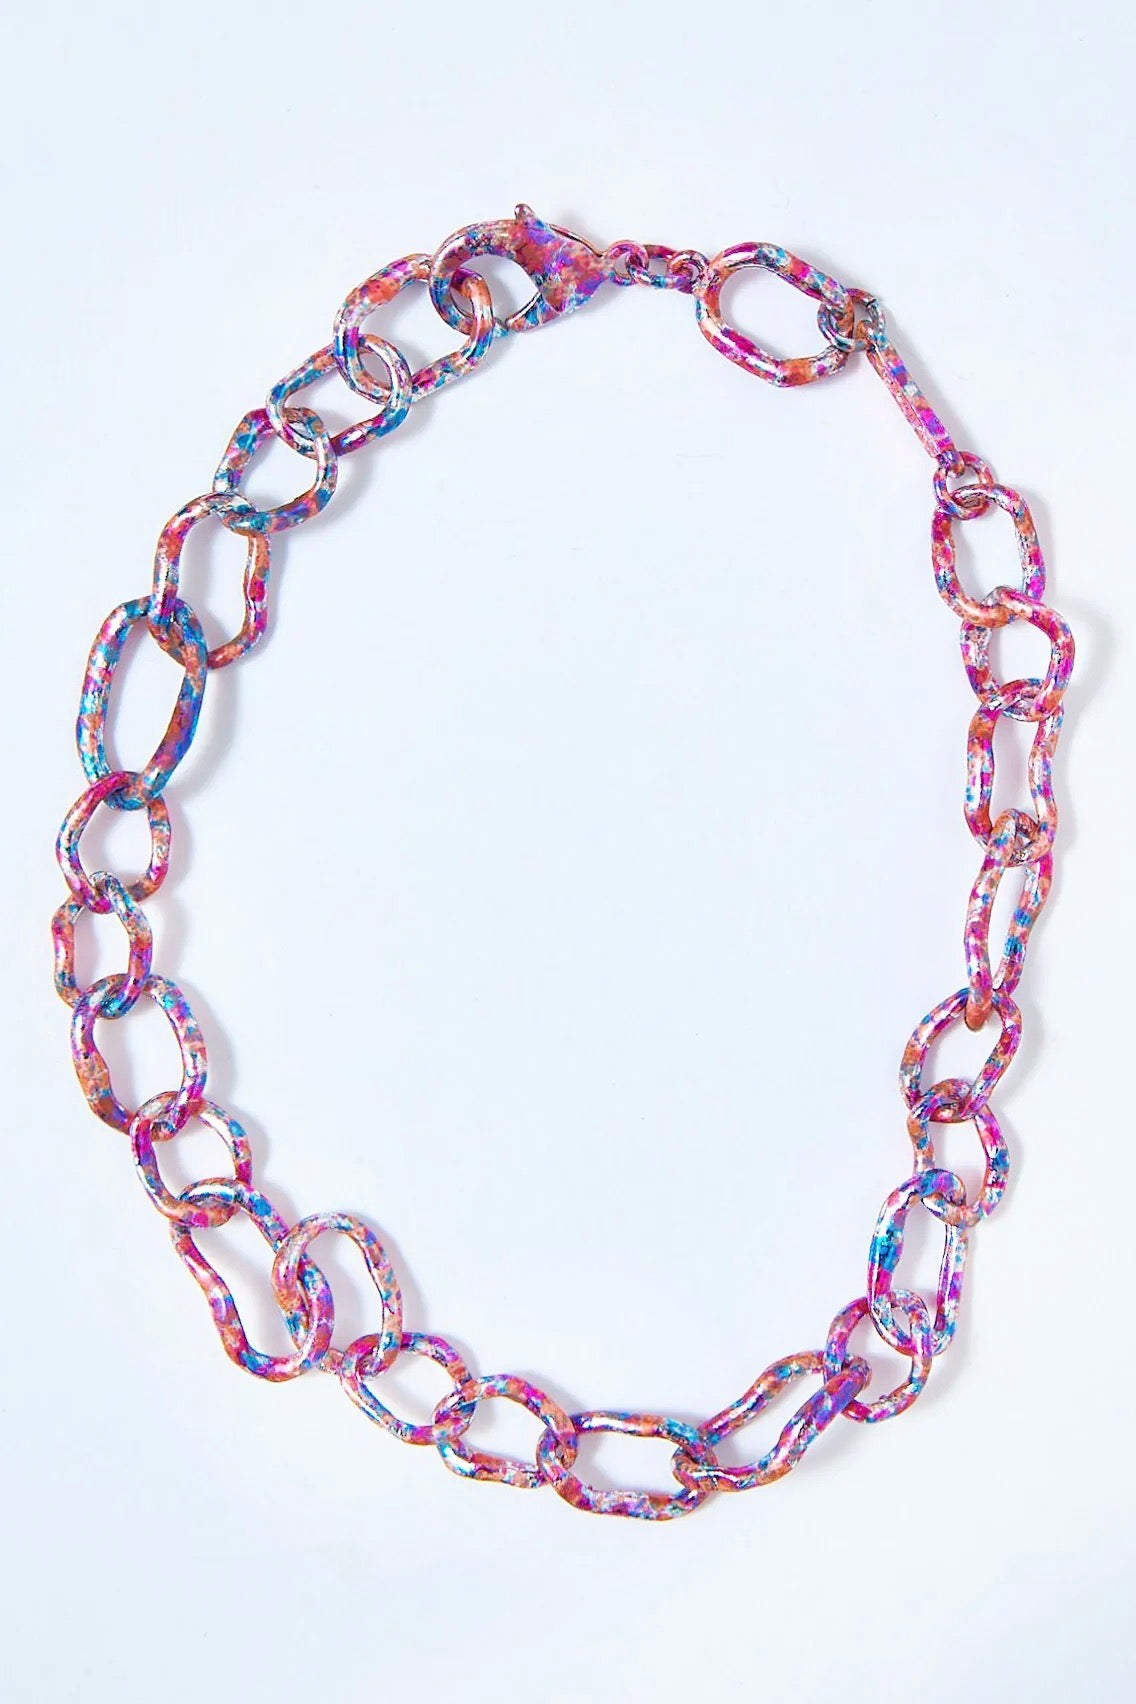 Collina Strada - Crushed Chain Necklace: Rainbow Polka Party